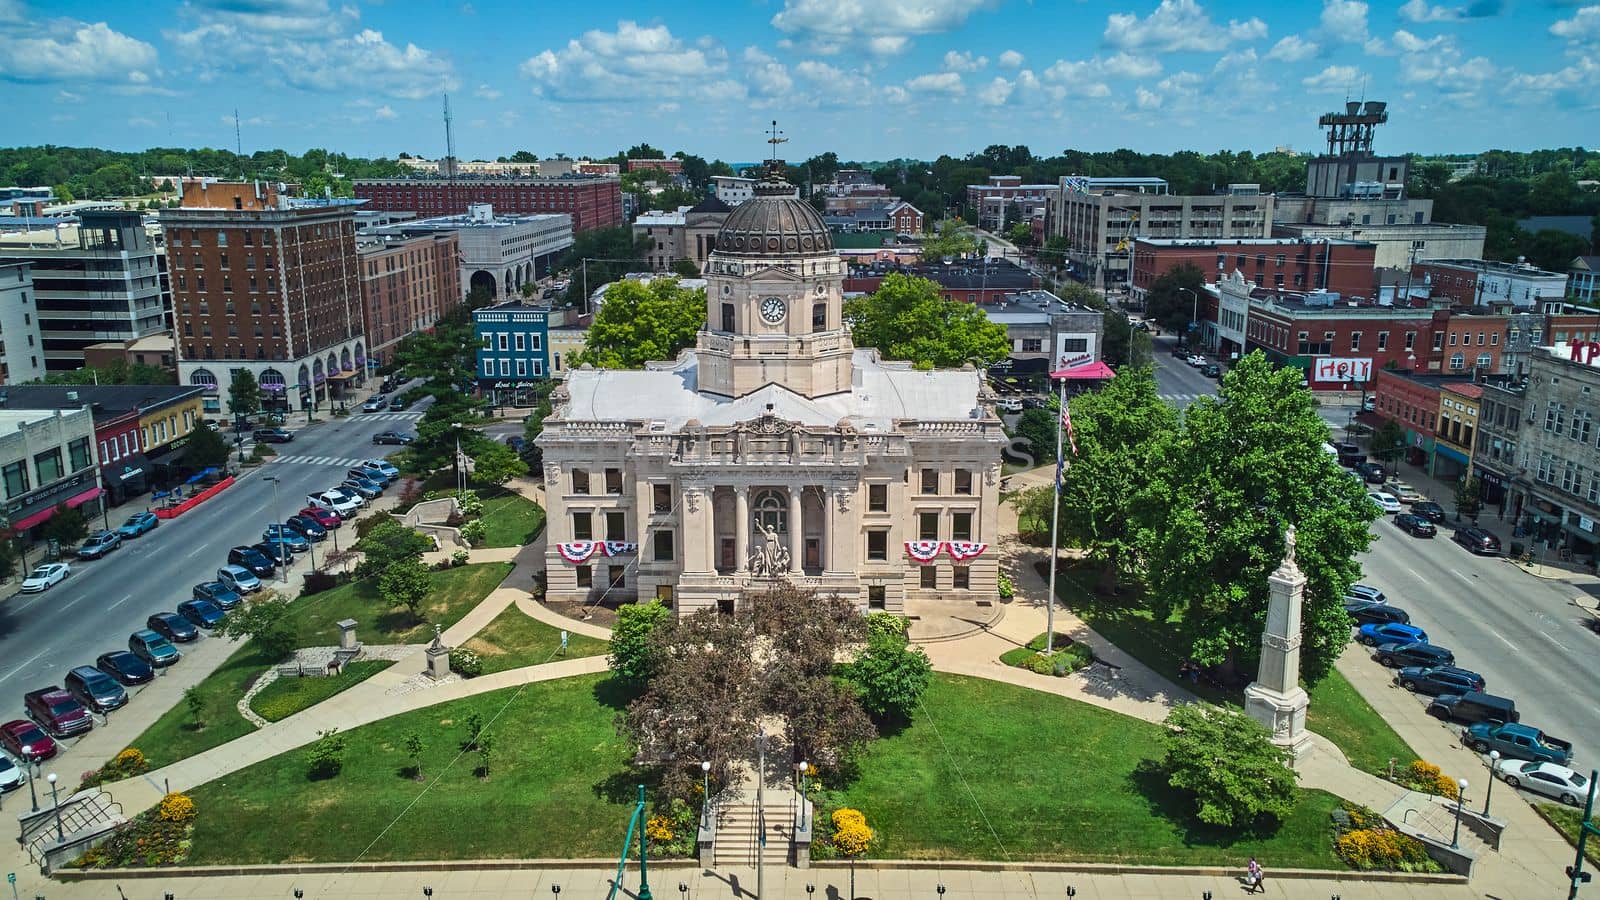 The Square and Courthouse aerial in Bloomington Indiana by njproductions